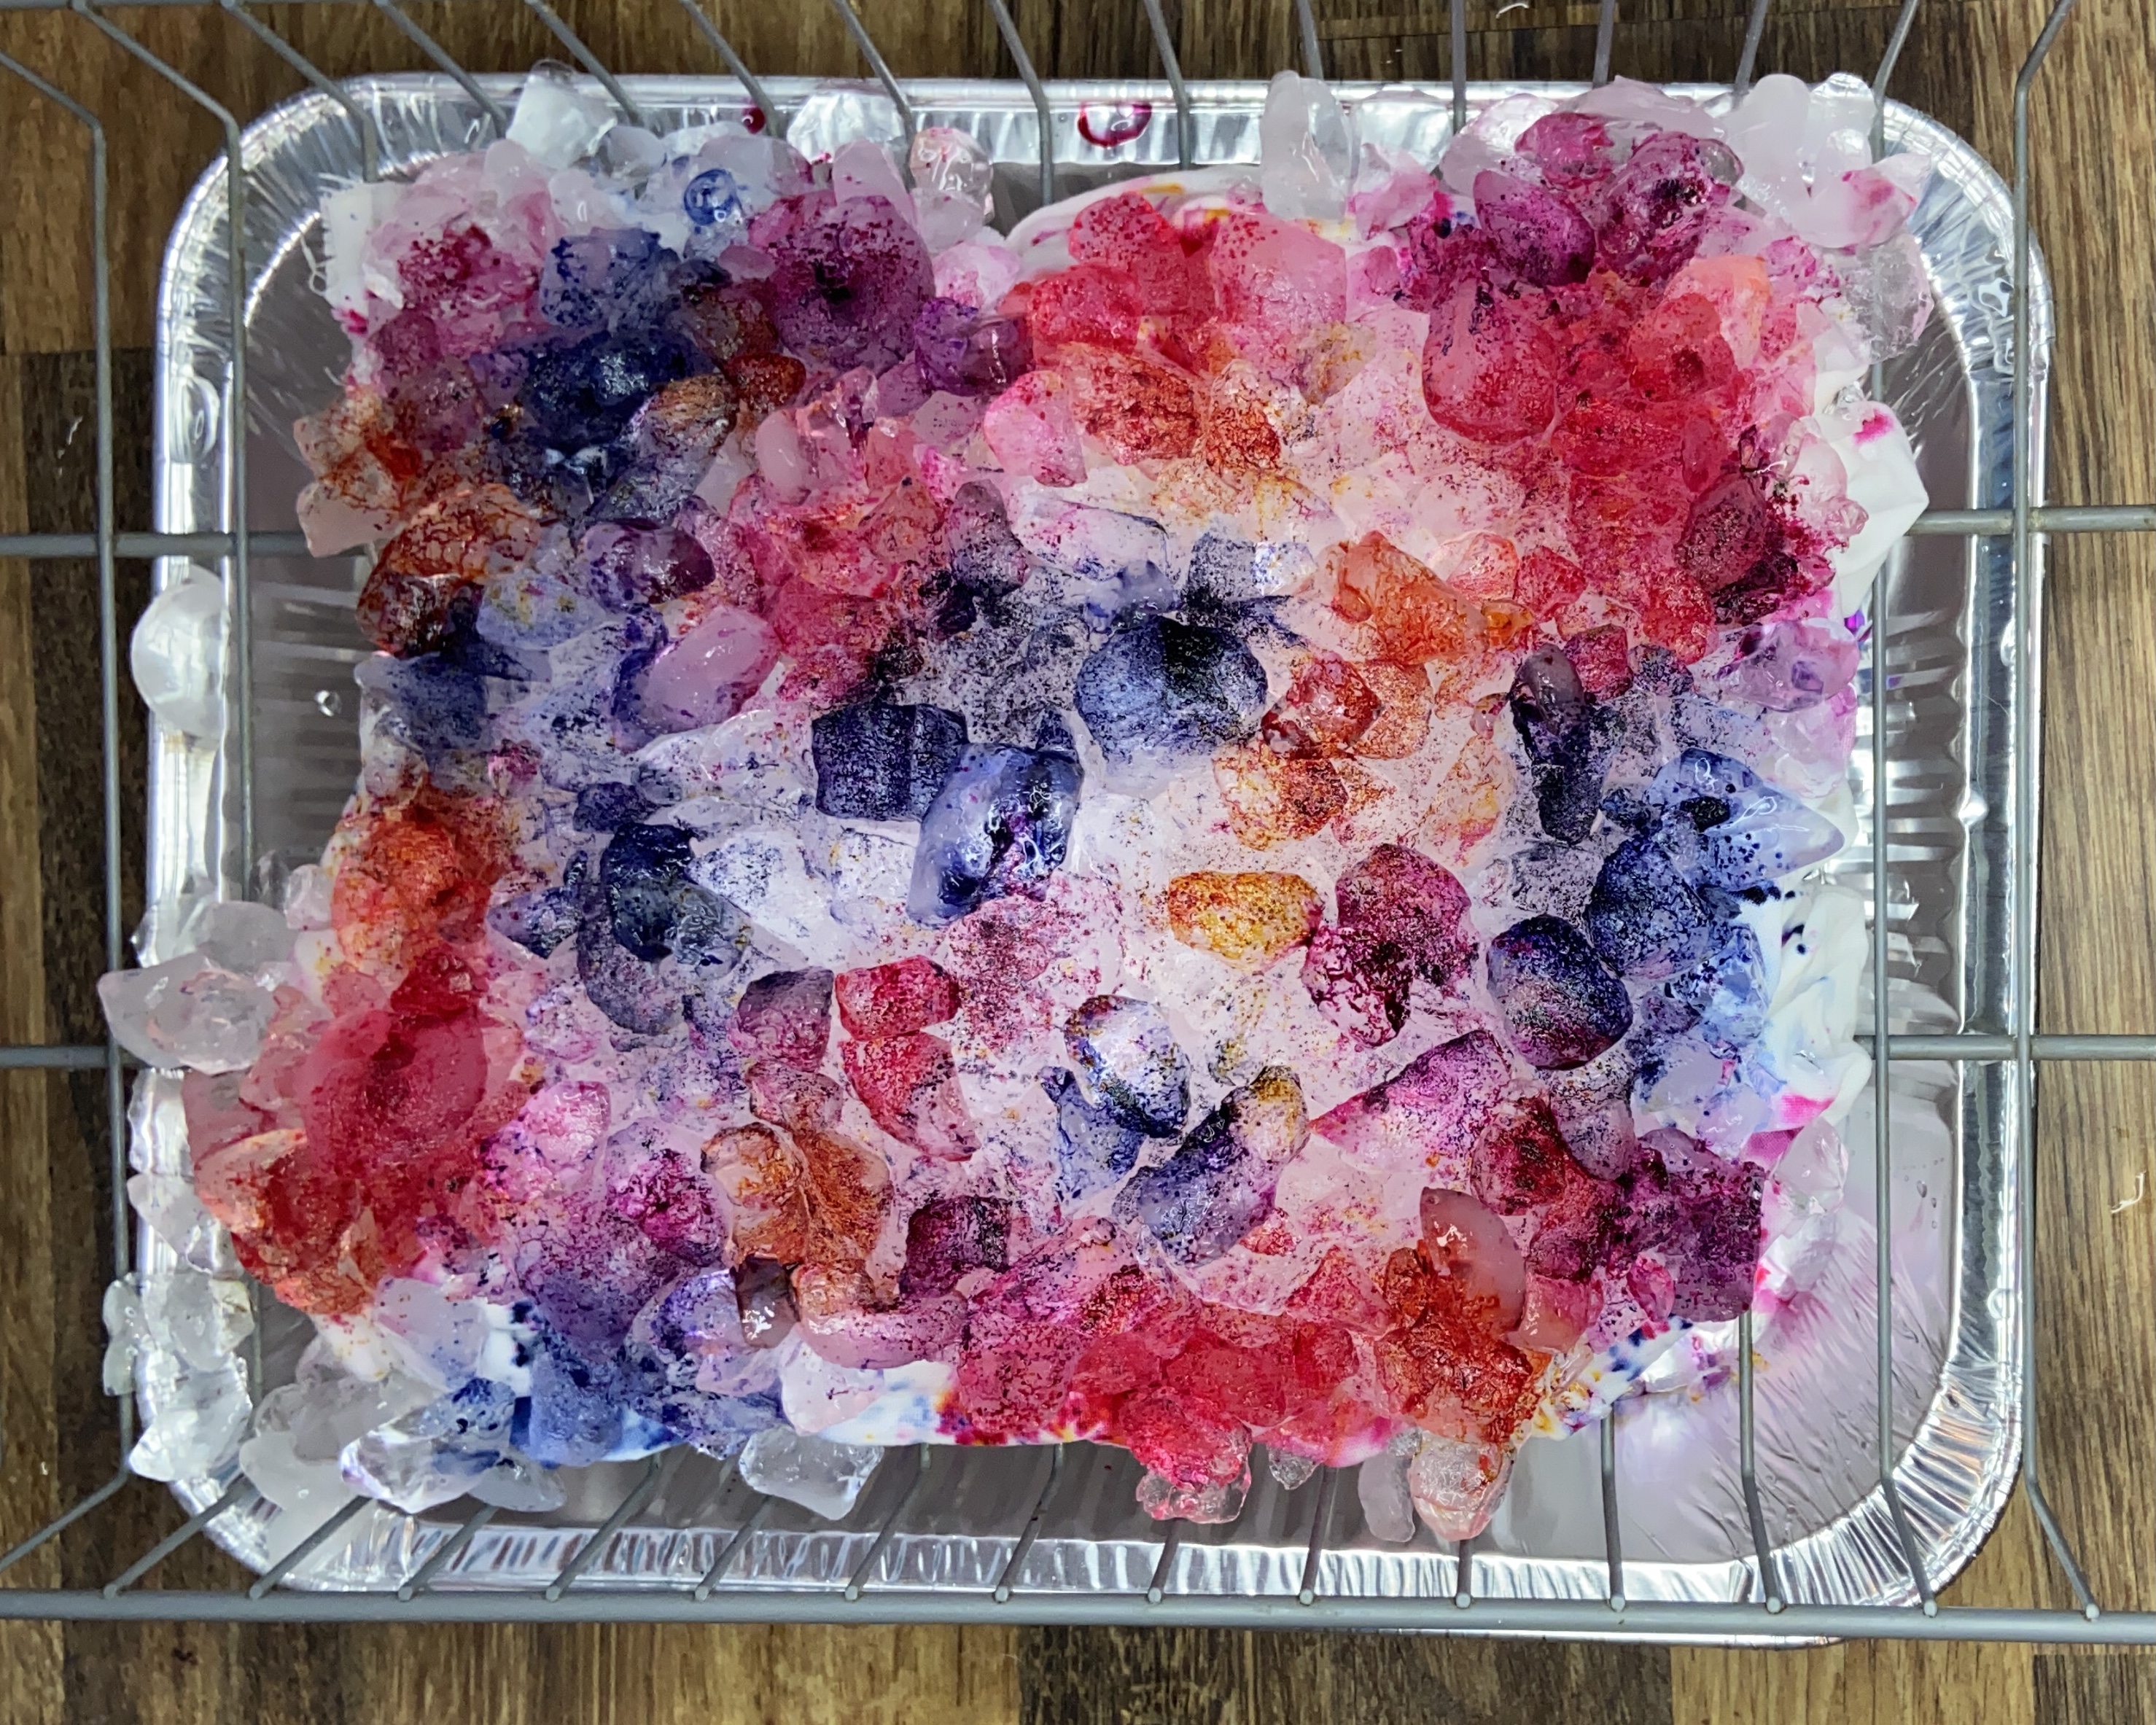 Chilled out crafts: how to ice dye! - Gathered